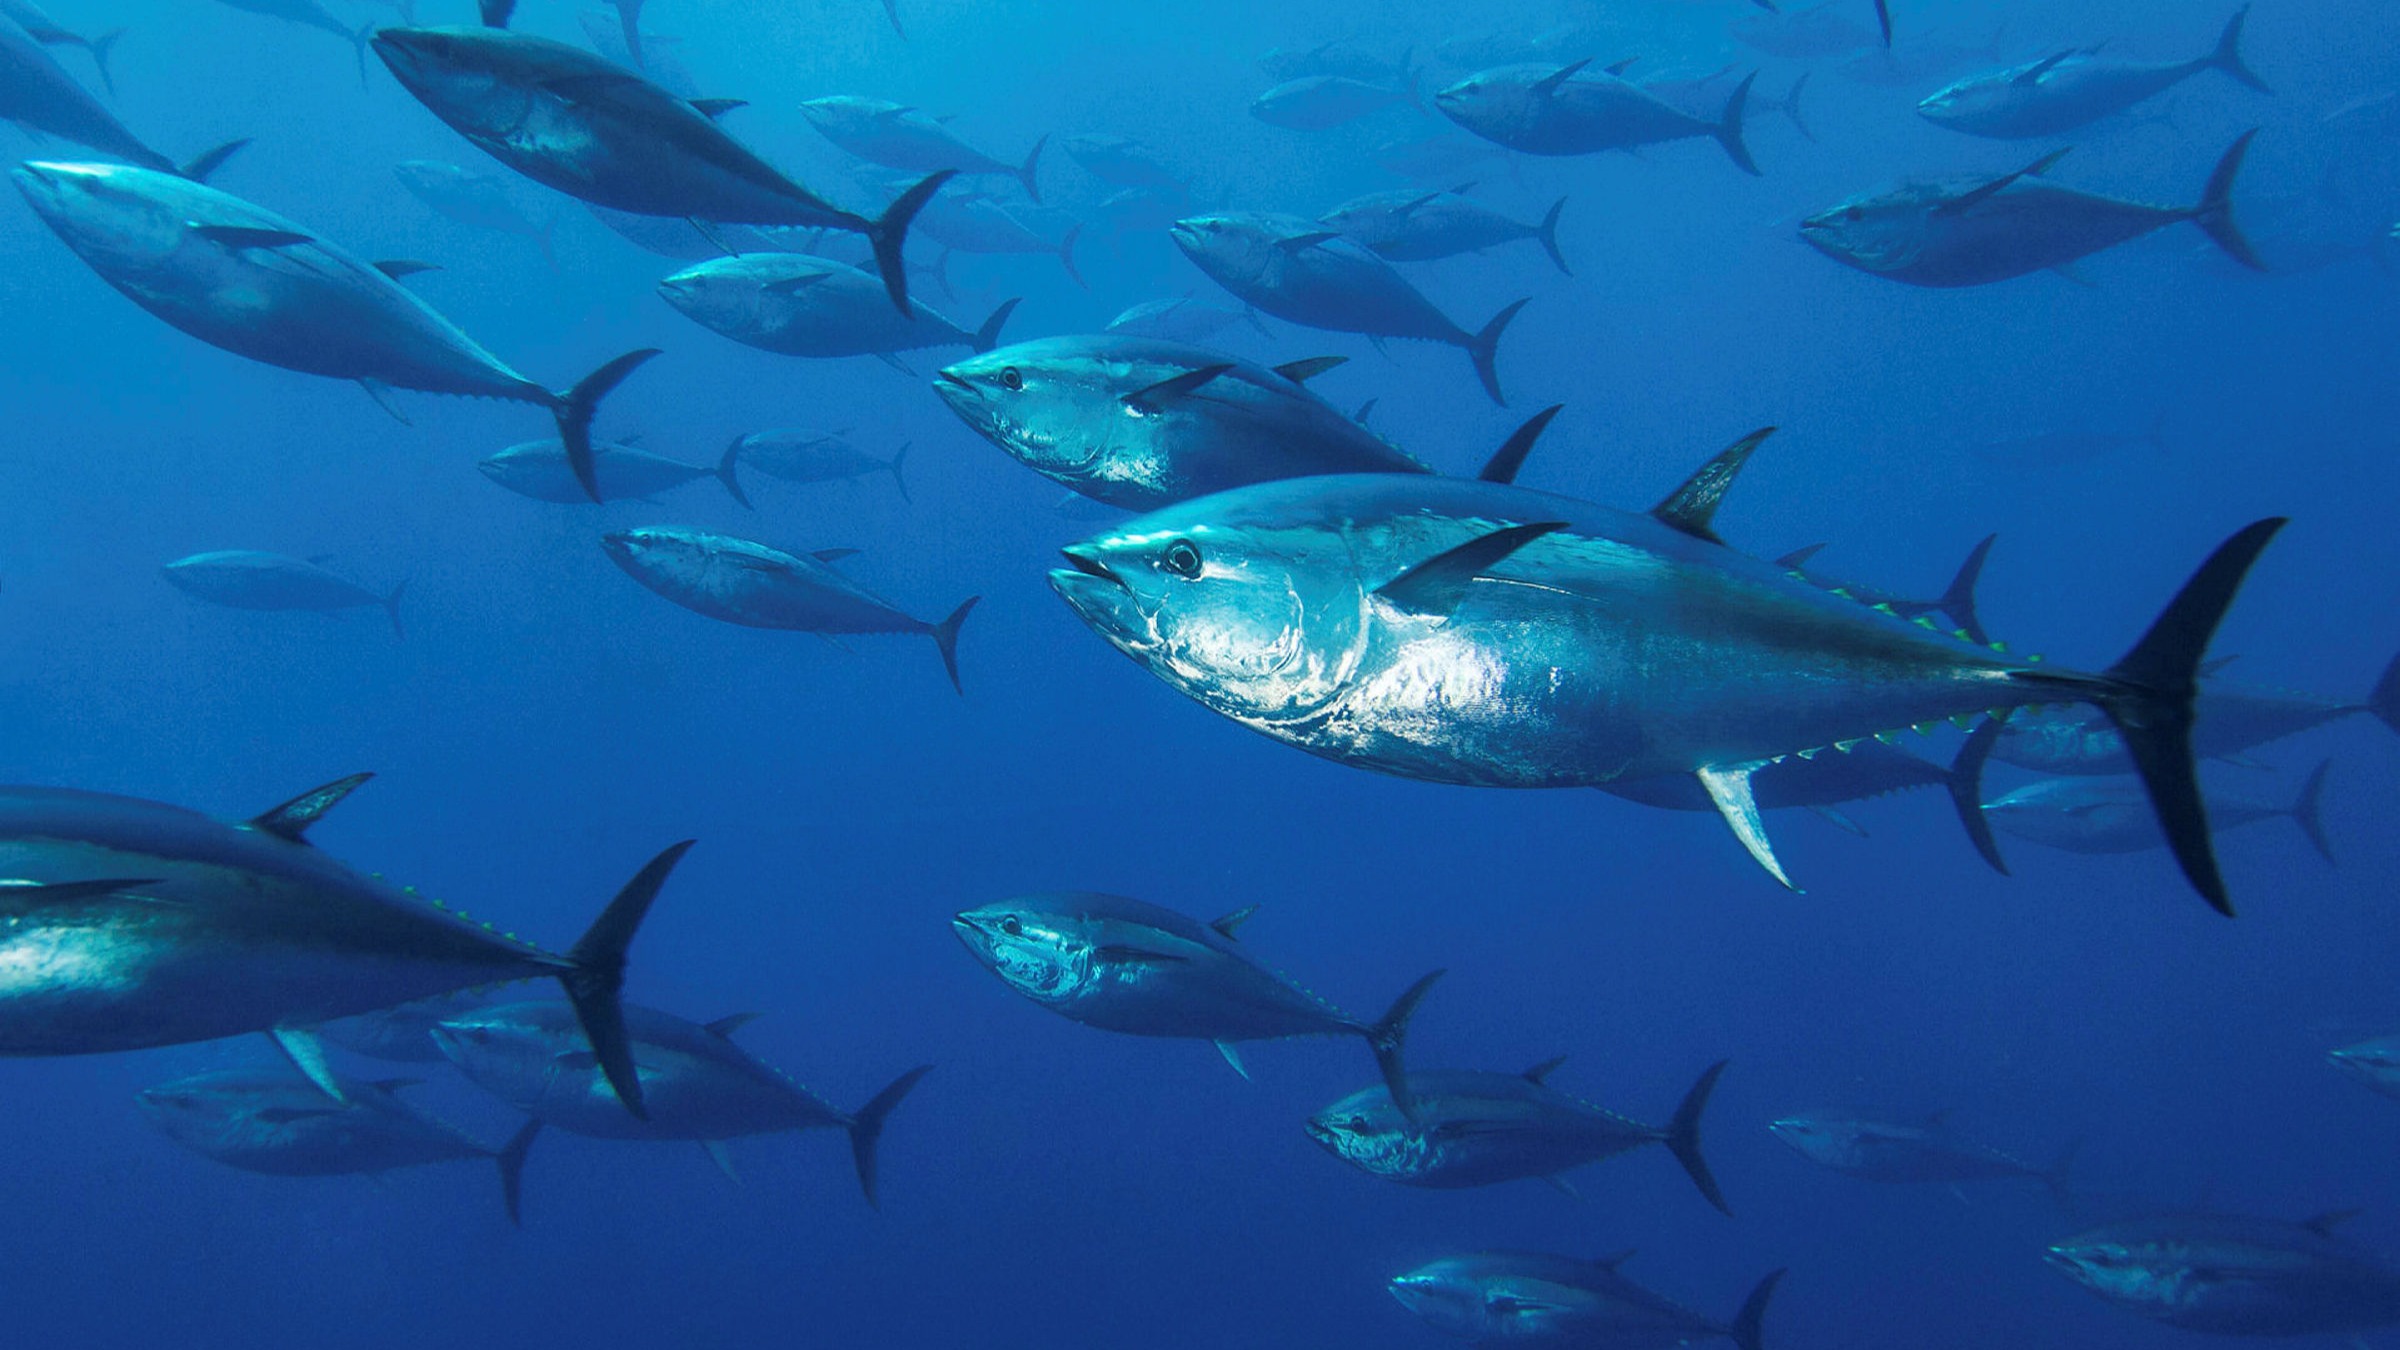 Bluefin tuna fishing season begins this week in Gibraltar waters: Everything you need to know about new rules and regulations to haul in these oceanic beasts